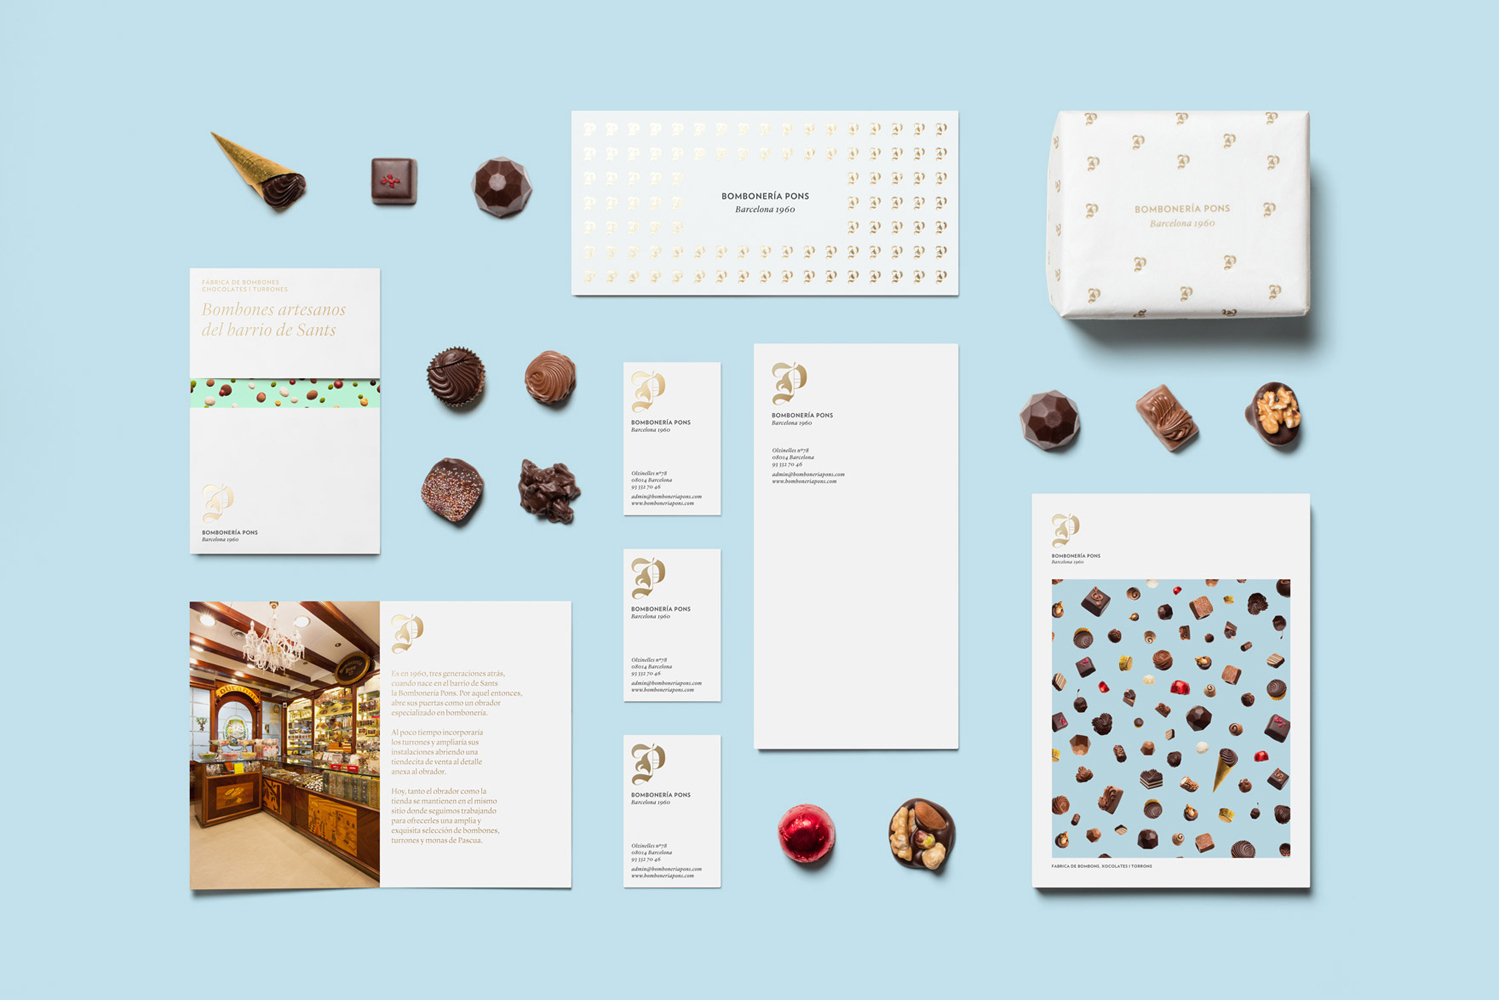 Modern luxury Confectionary Branding & Packaging – Bombonería Pons by Mucho, Spain